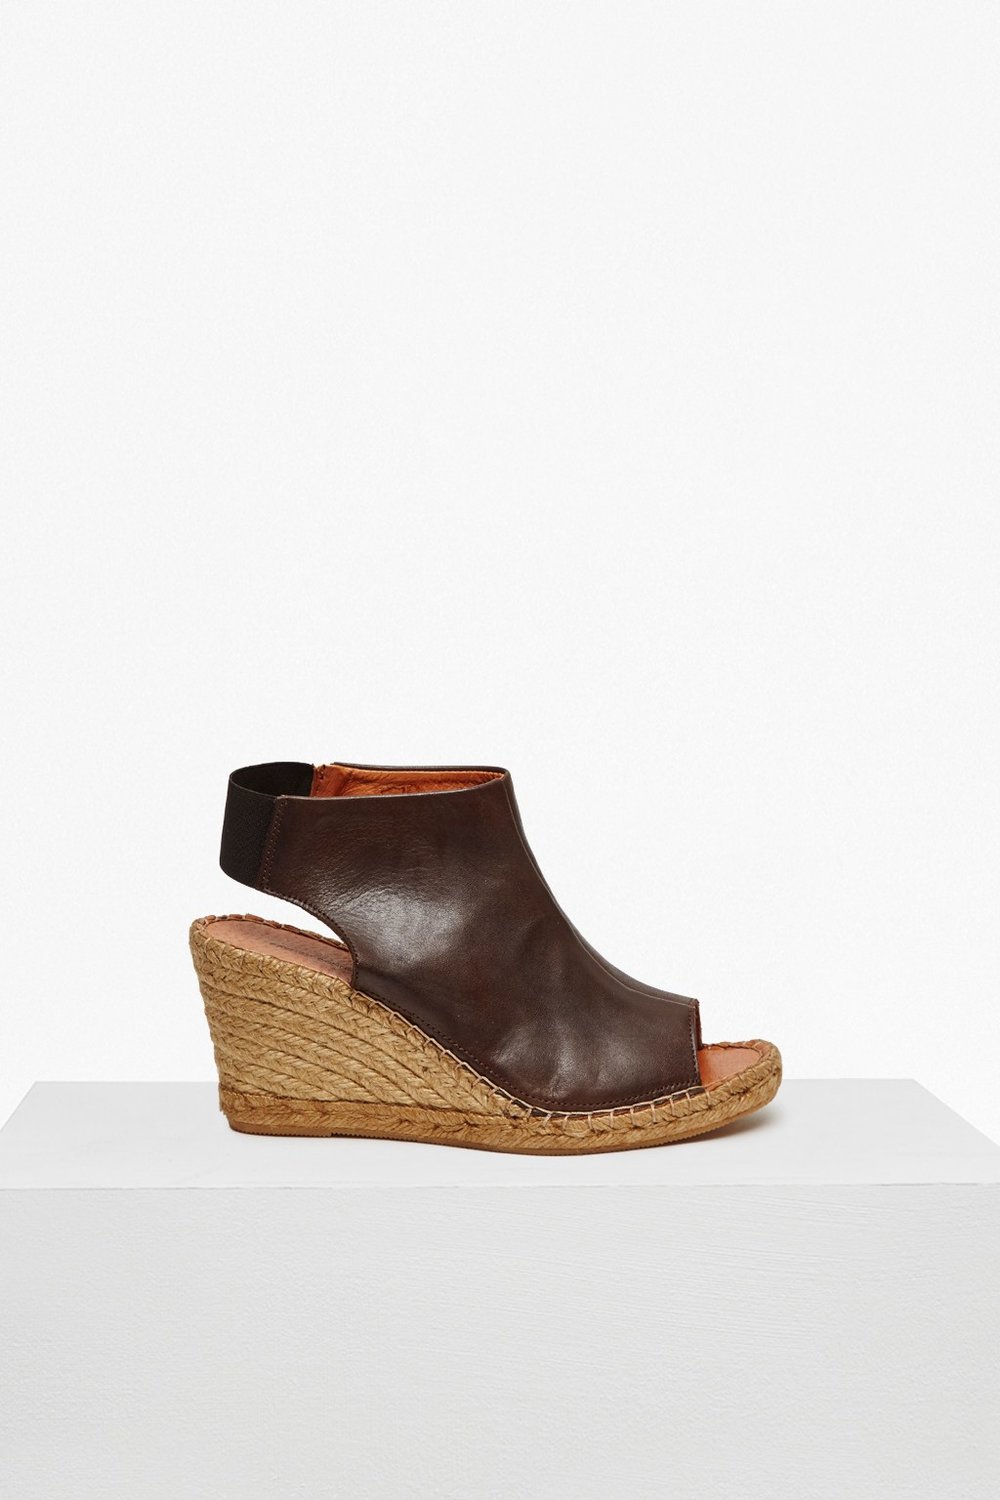  Avery Leather Espadrille Wedge, French Connection, £90 